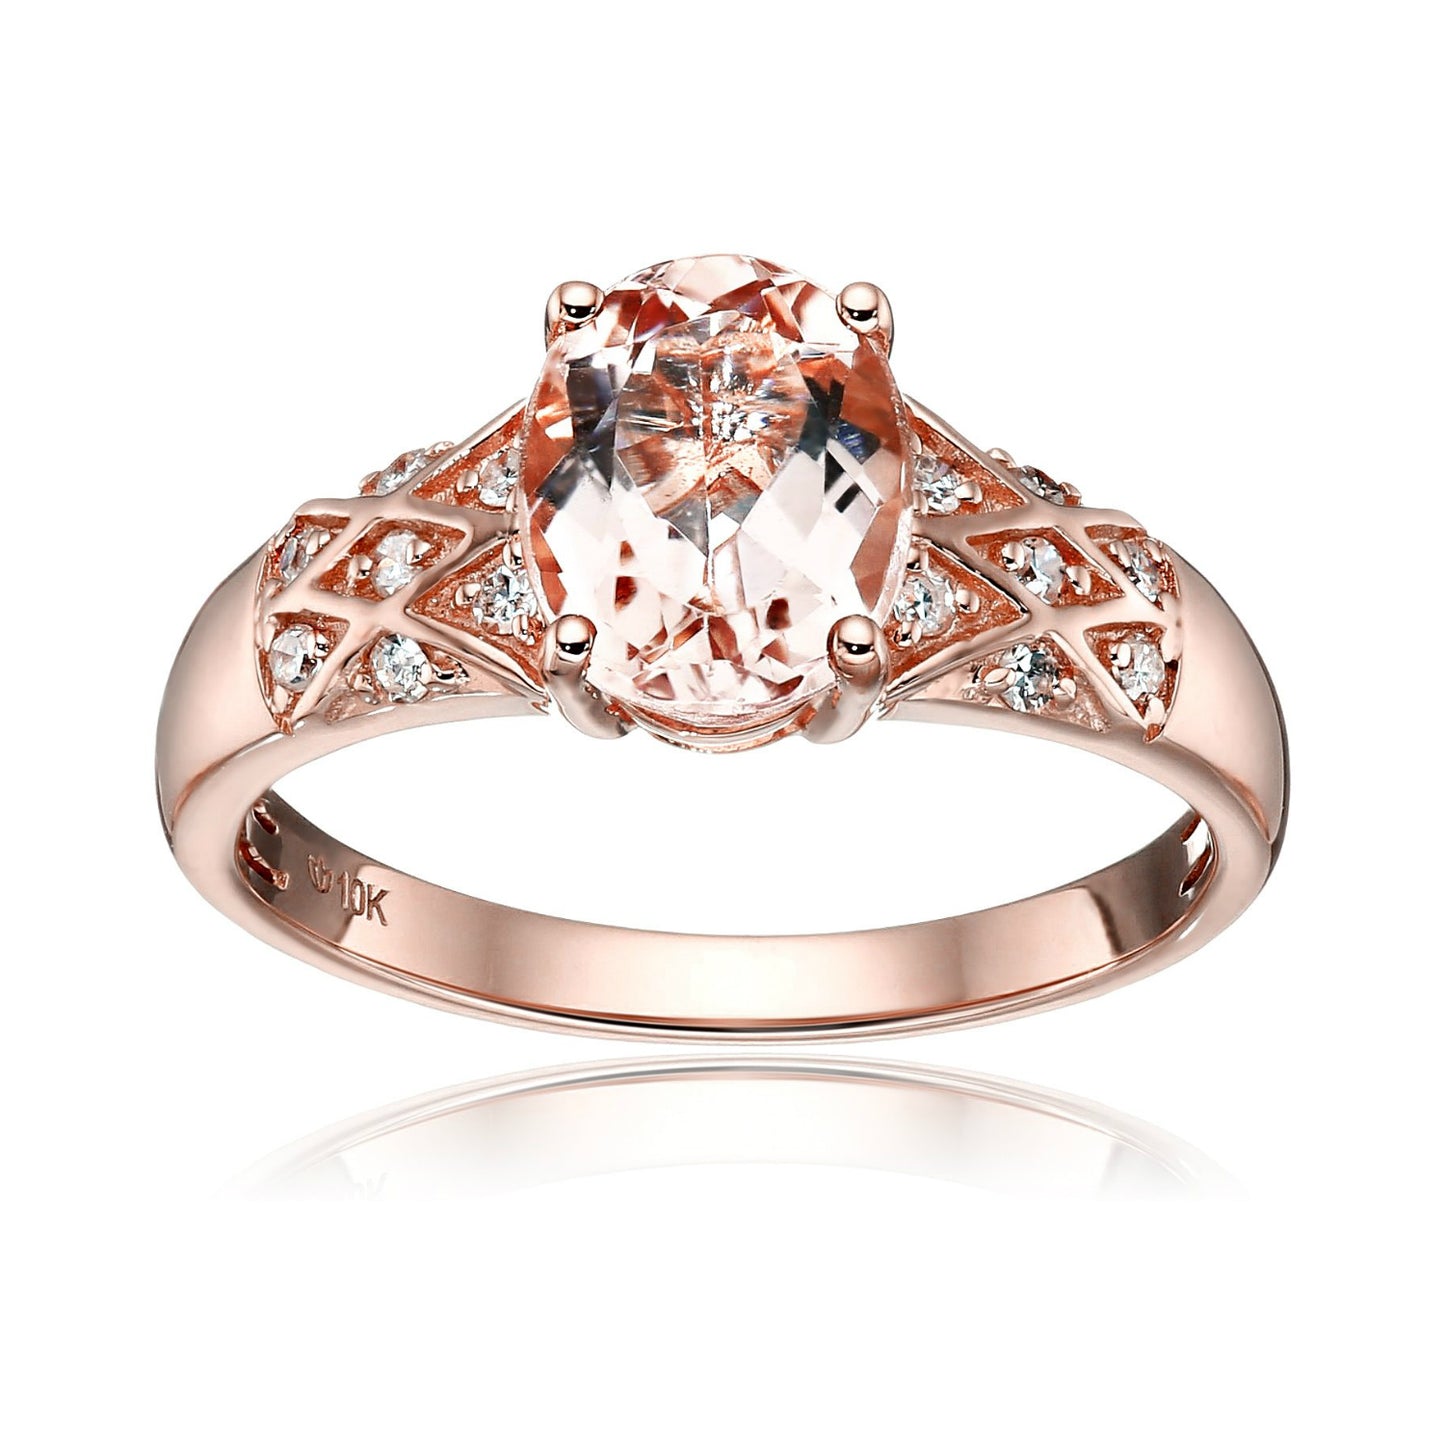 10k Rose Gold Morganite and Diamond Solitaire Engagement Ring (1/8cttw, H-I Color, I1-I2 Clarity), - pinctore